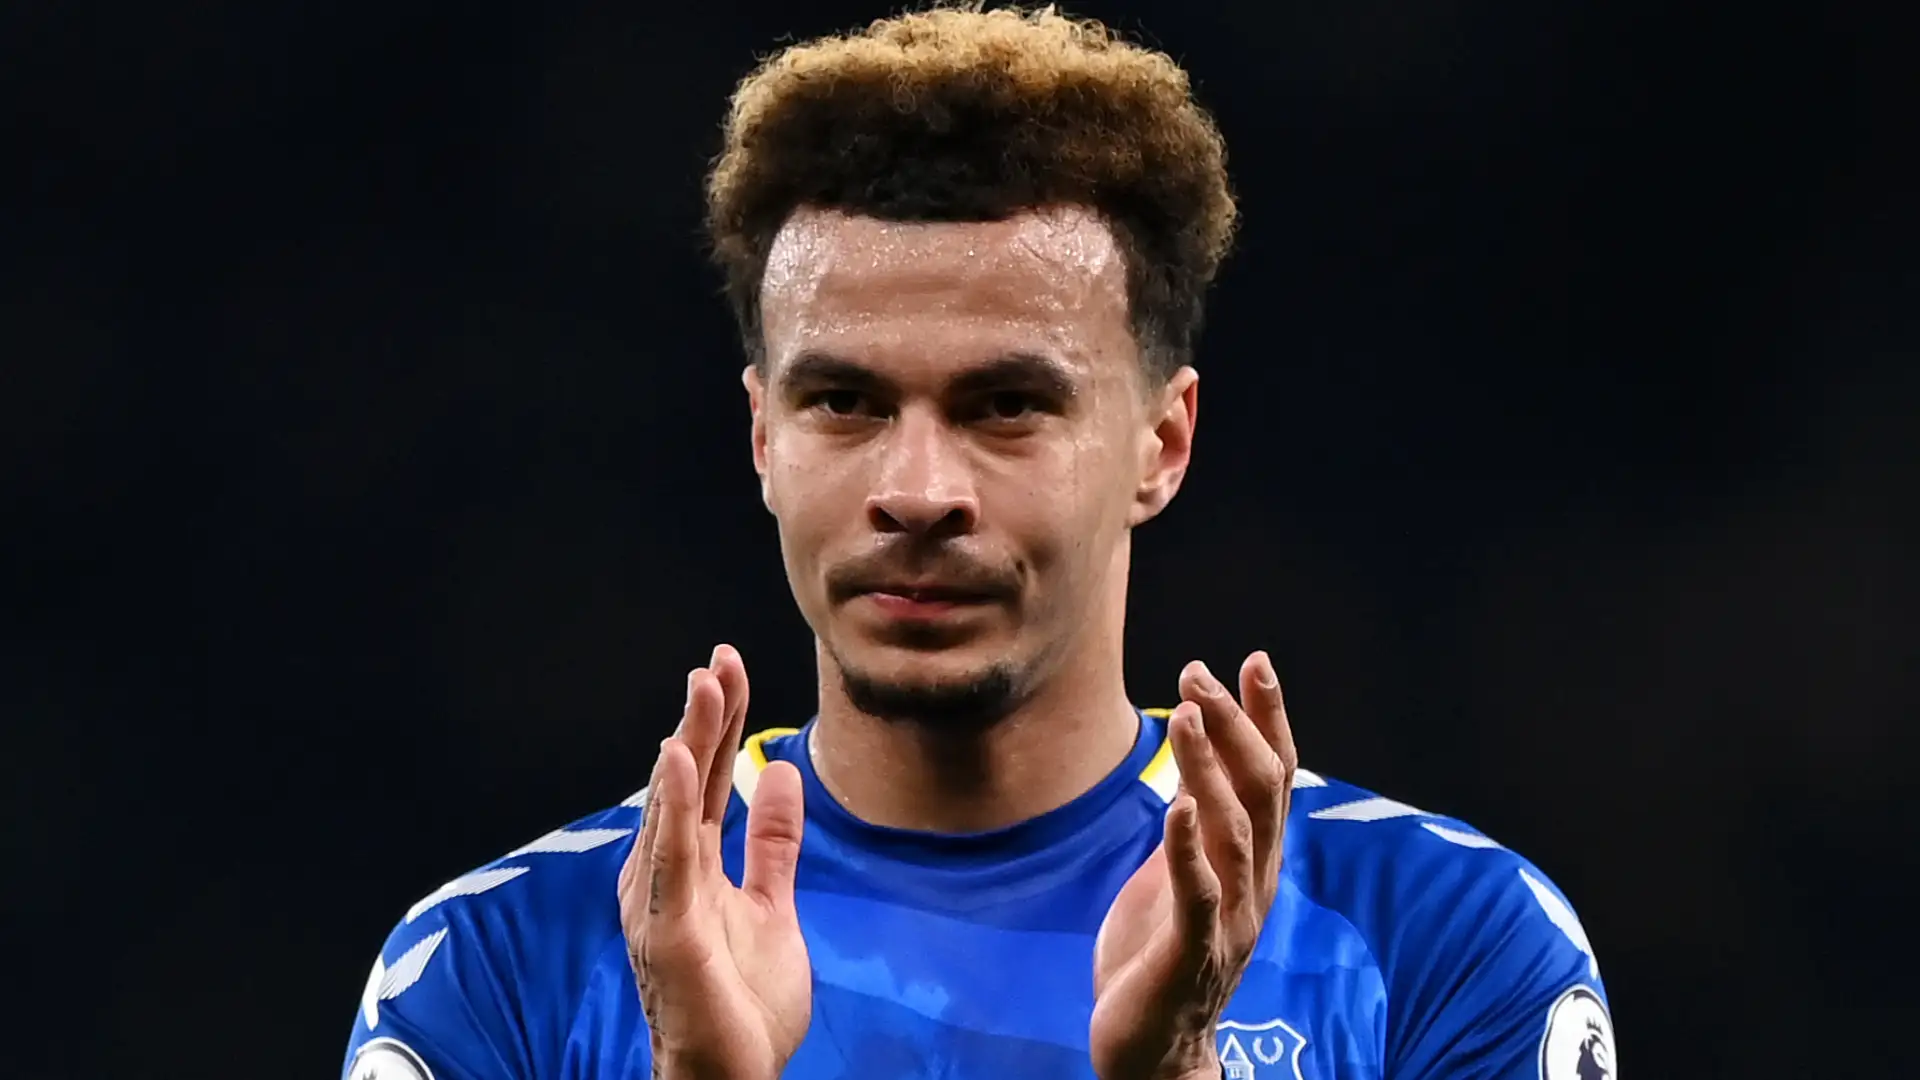 'Drain on the club!' - Miffed Everton fans voice their disgust after injury-plagued Dele Alli fails to join in Goodison Park lap of honour ahead of inevitable summer exit